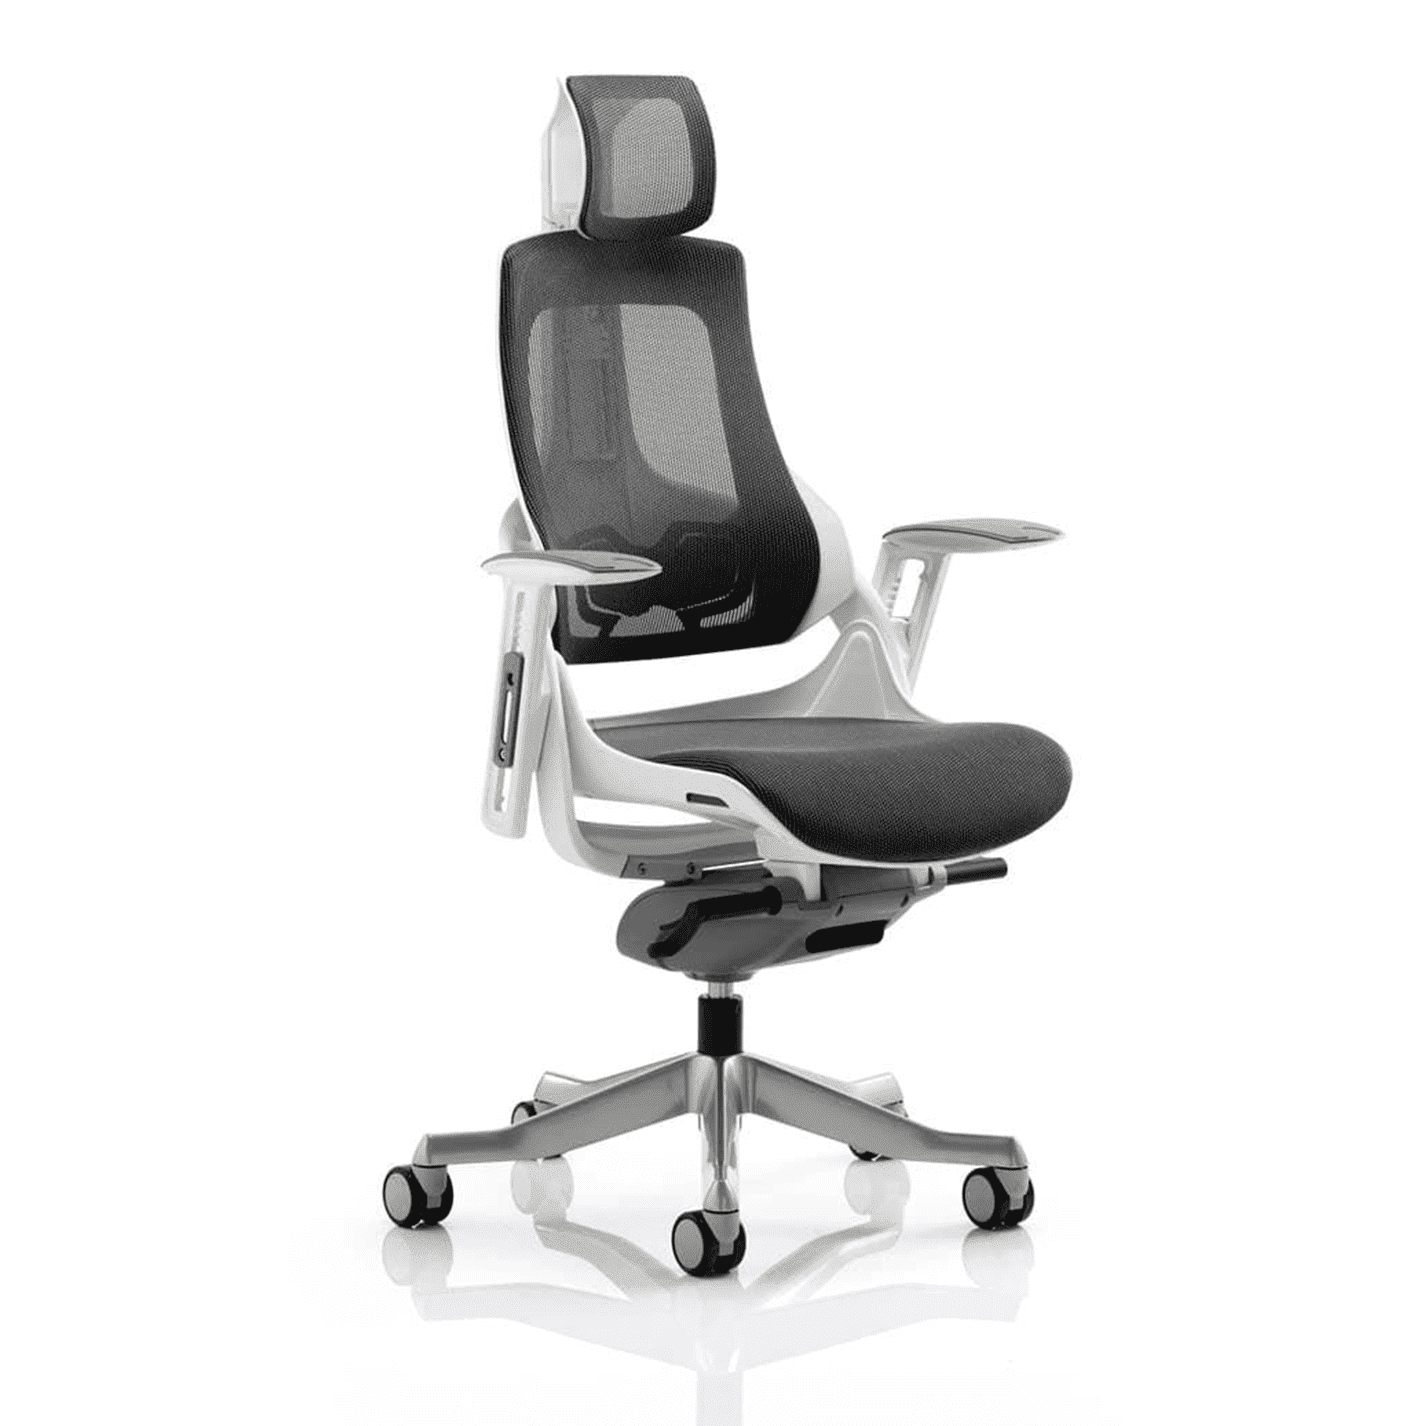 Zure High Back Executive Office Chair - White Shell, Adjustable Arms, Lumbar Support, Headrest, 135kg Capacity, 8hr Usage, 5yr Warranty